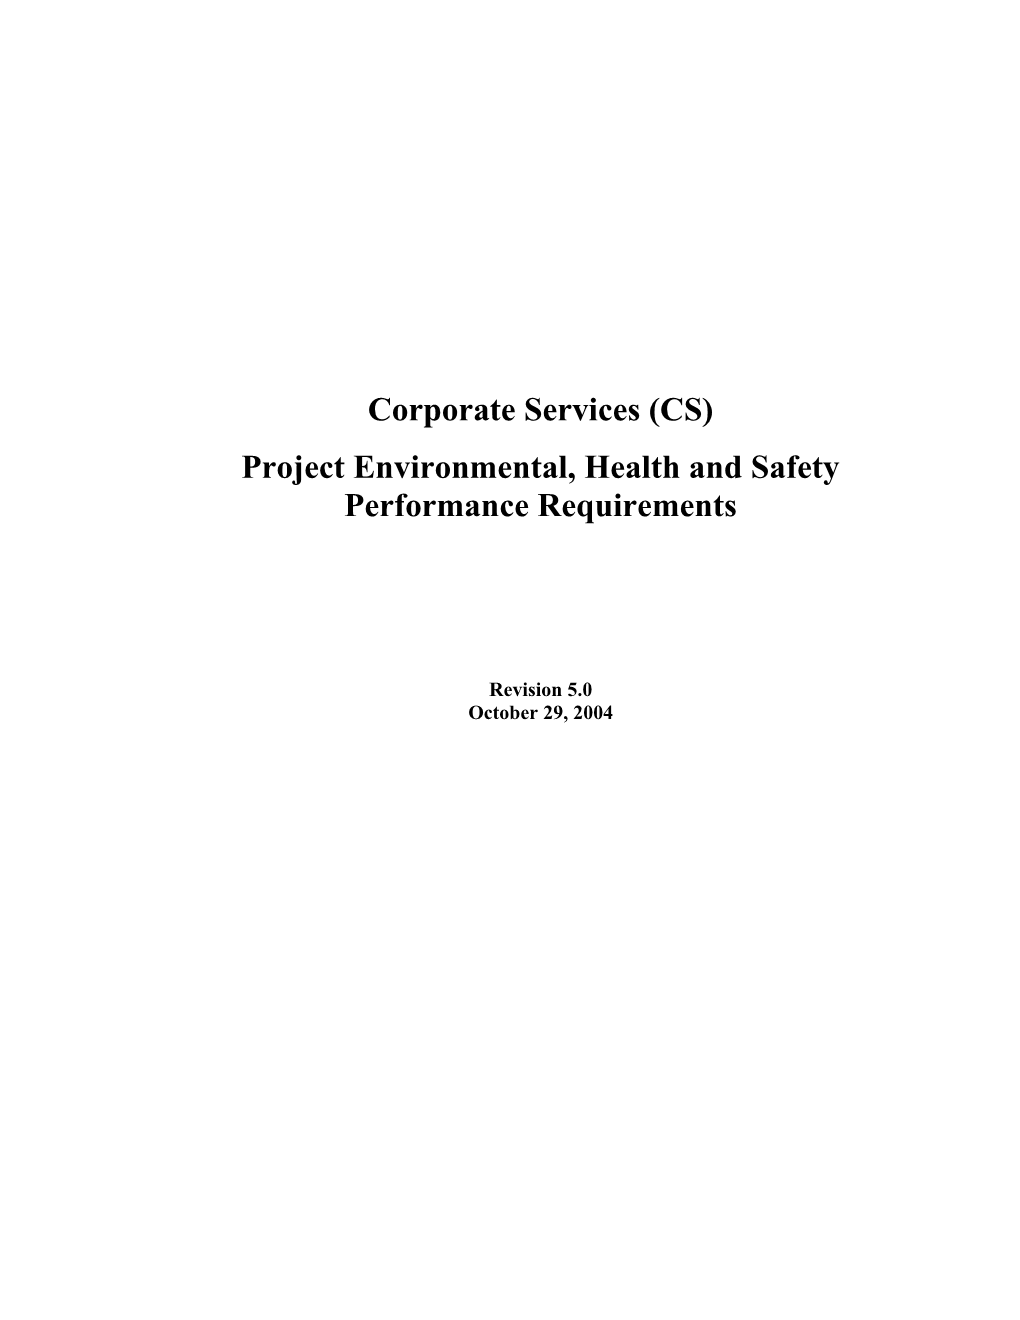 CS Project Environmental, Health and Safety Performance Requirements